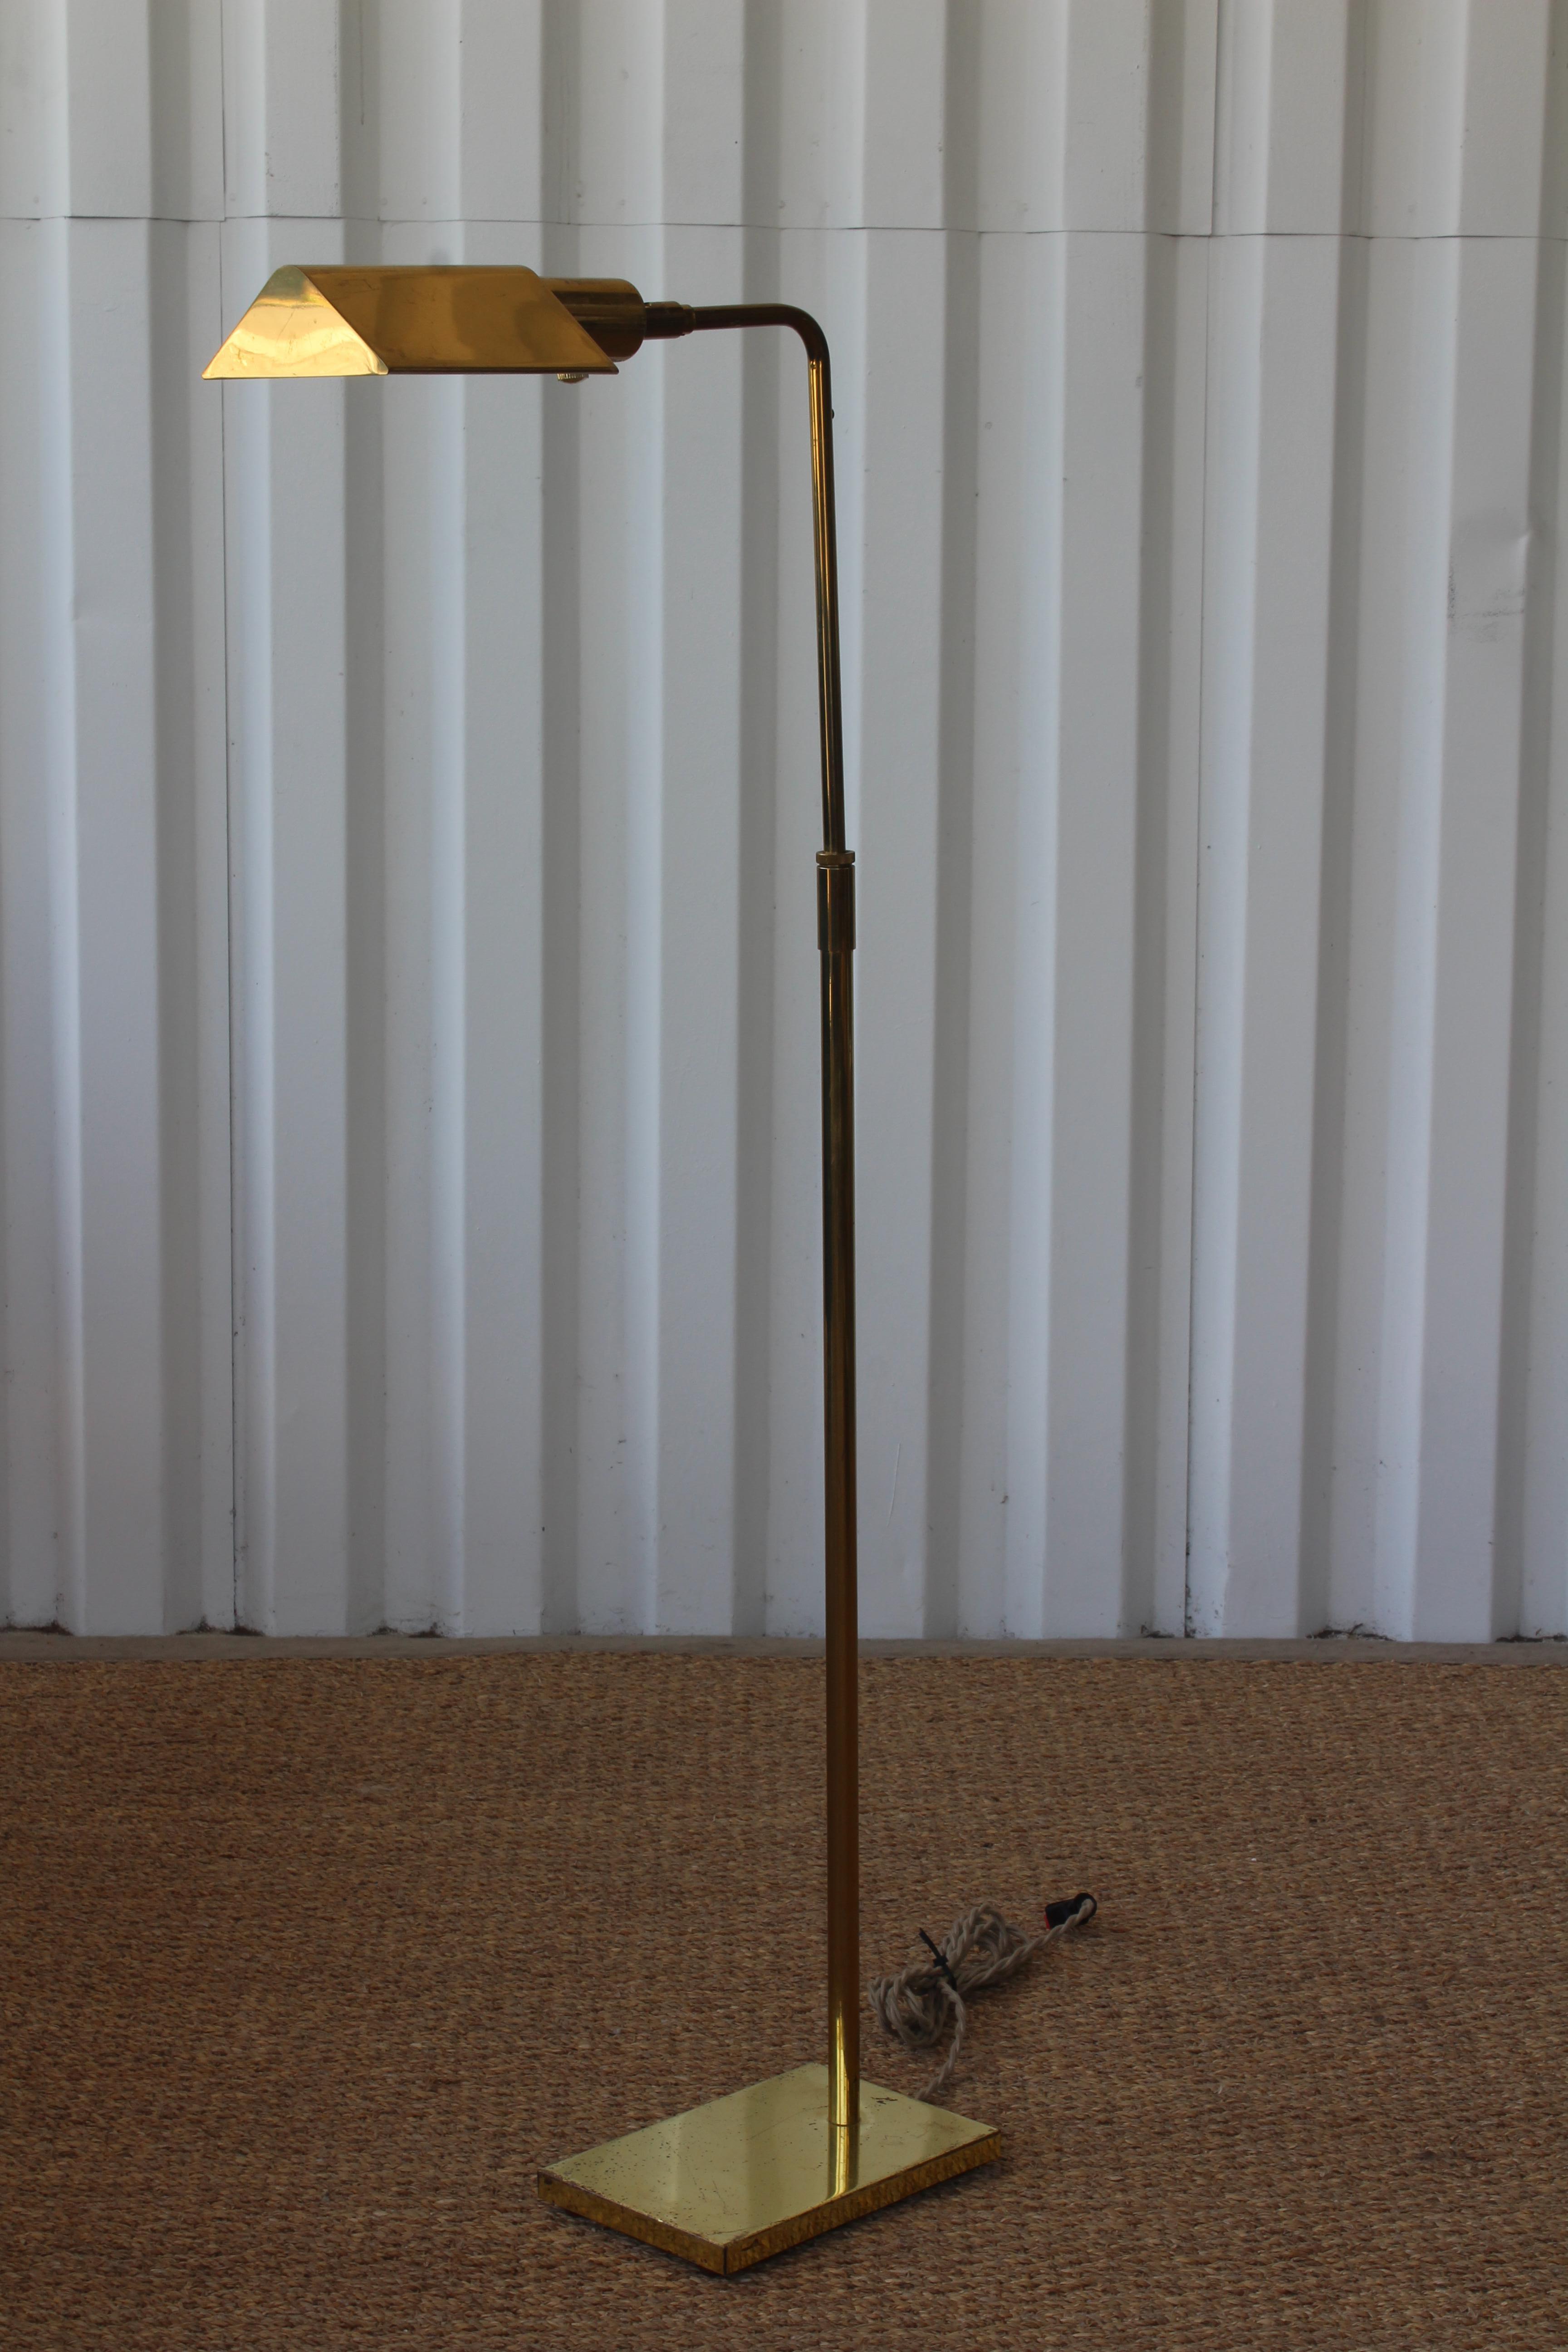 Vintage 1970s brass pharmacy lamp by Koch & Lowy. This lamp shows signs of wear. New wiring and cord.